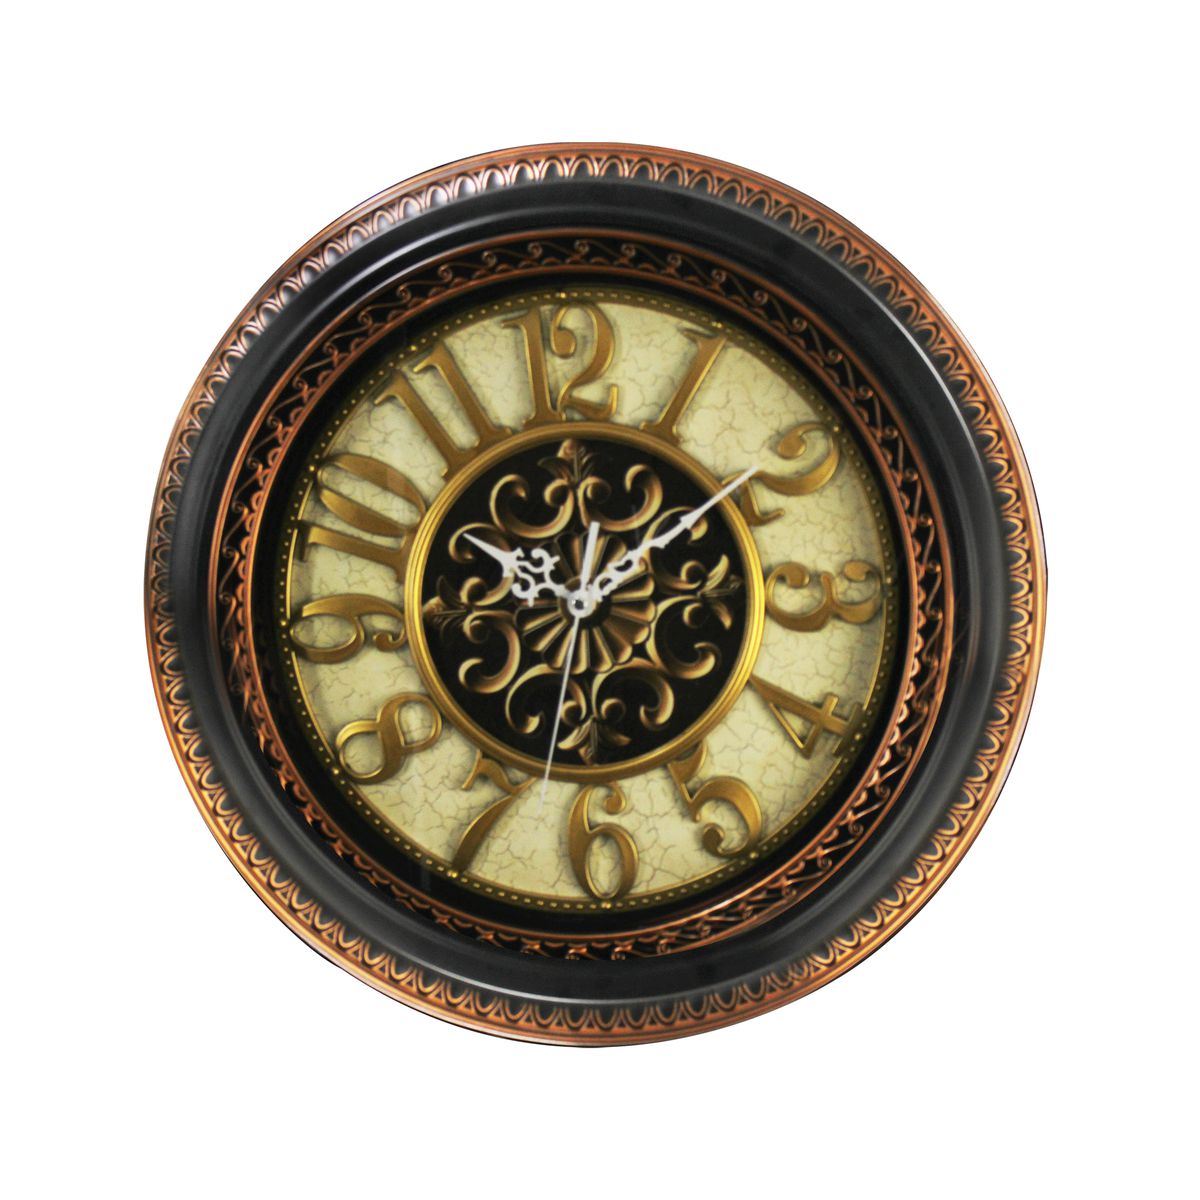 Ornate Border Round Wall Clock with Anrique Motif - 006